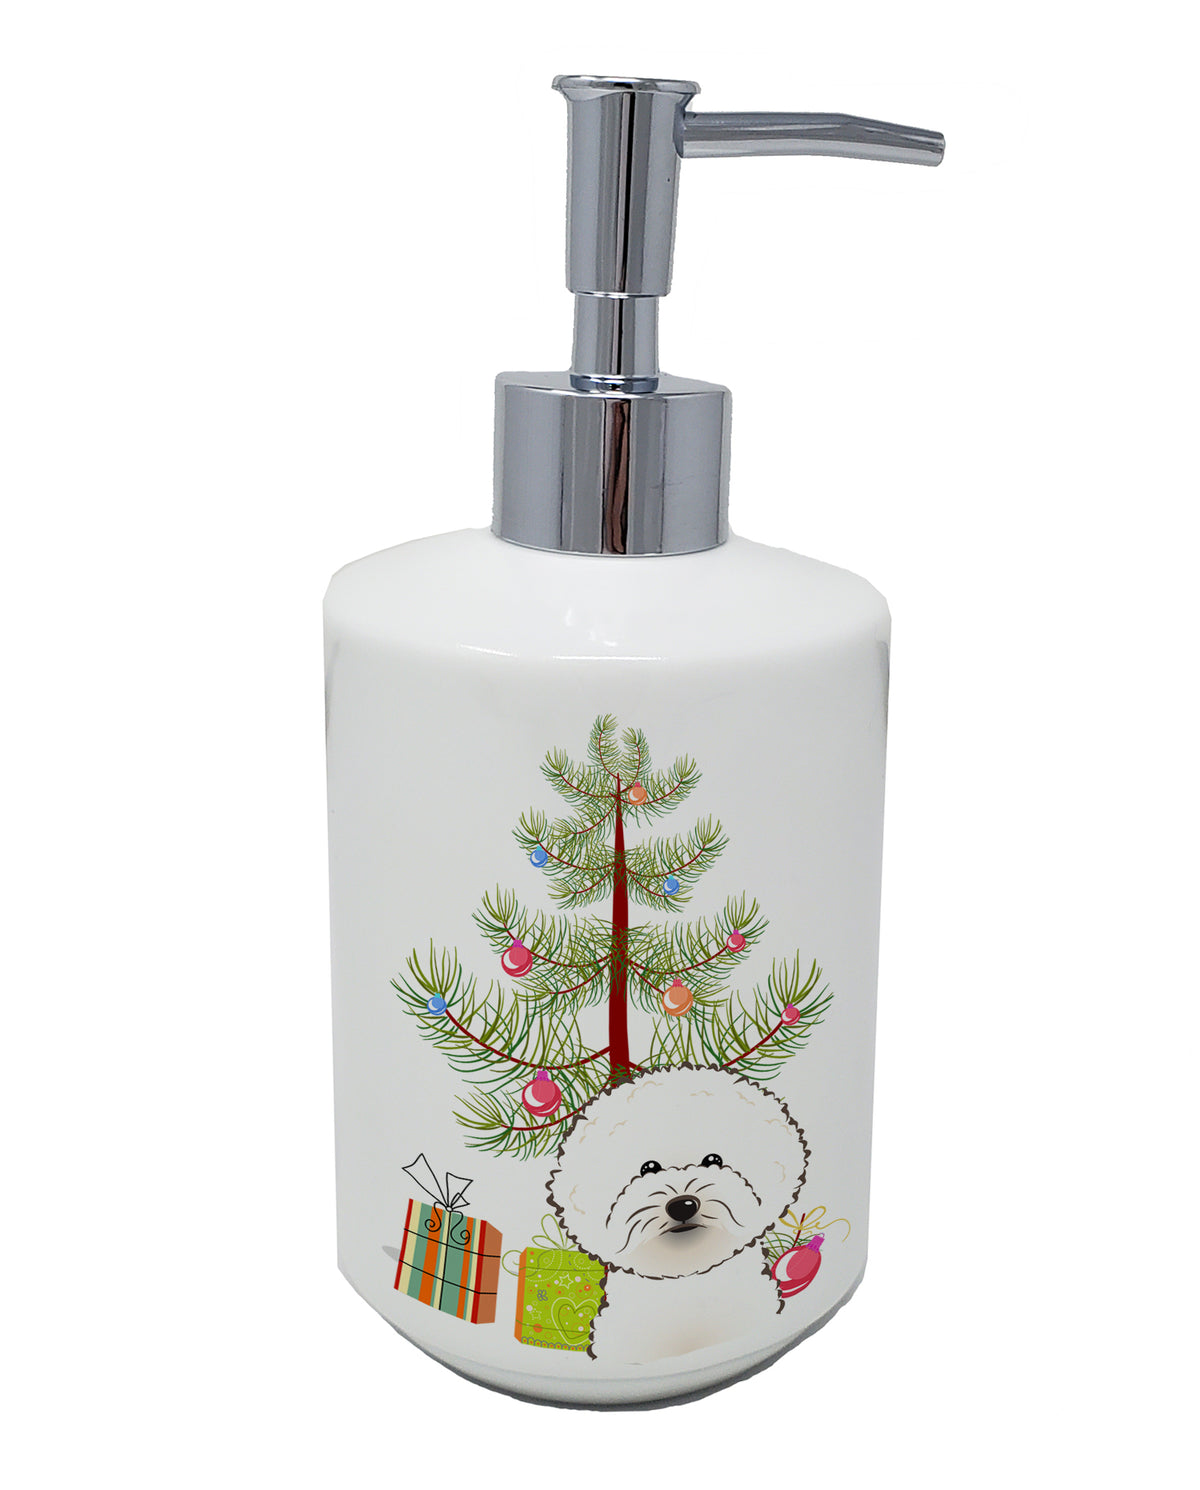 Buy this Christmas Tree and Bichon Frise Ceramic Soap Dispenser